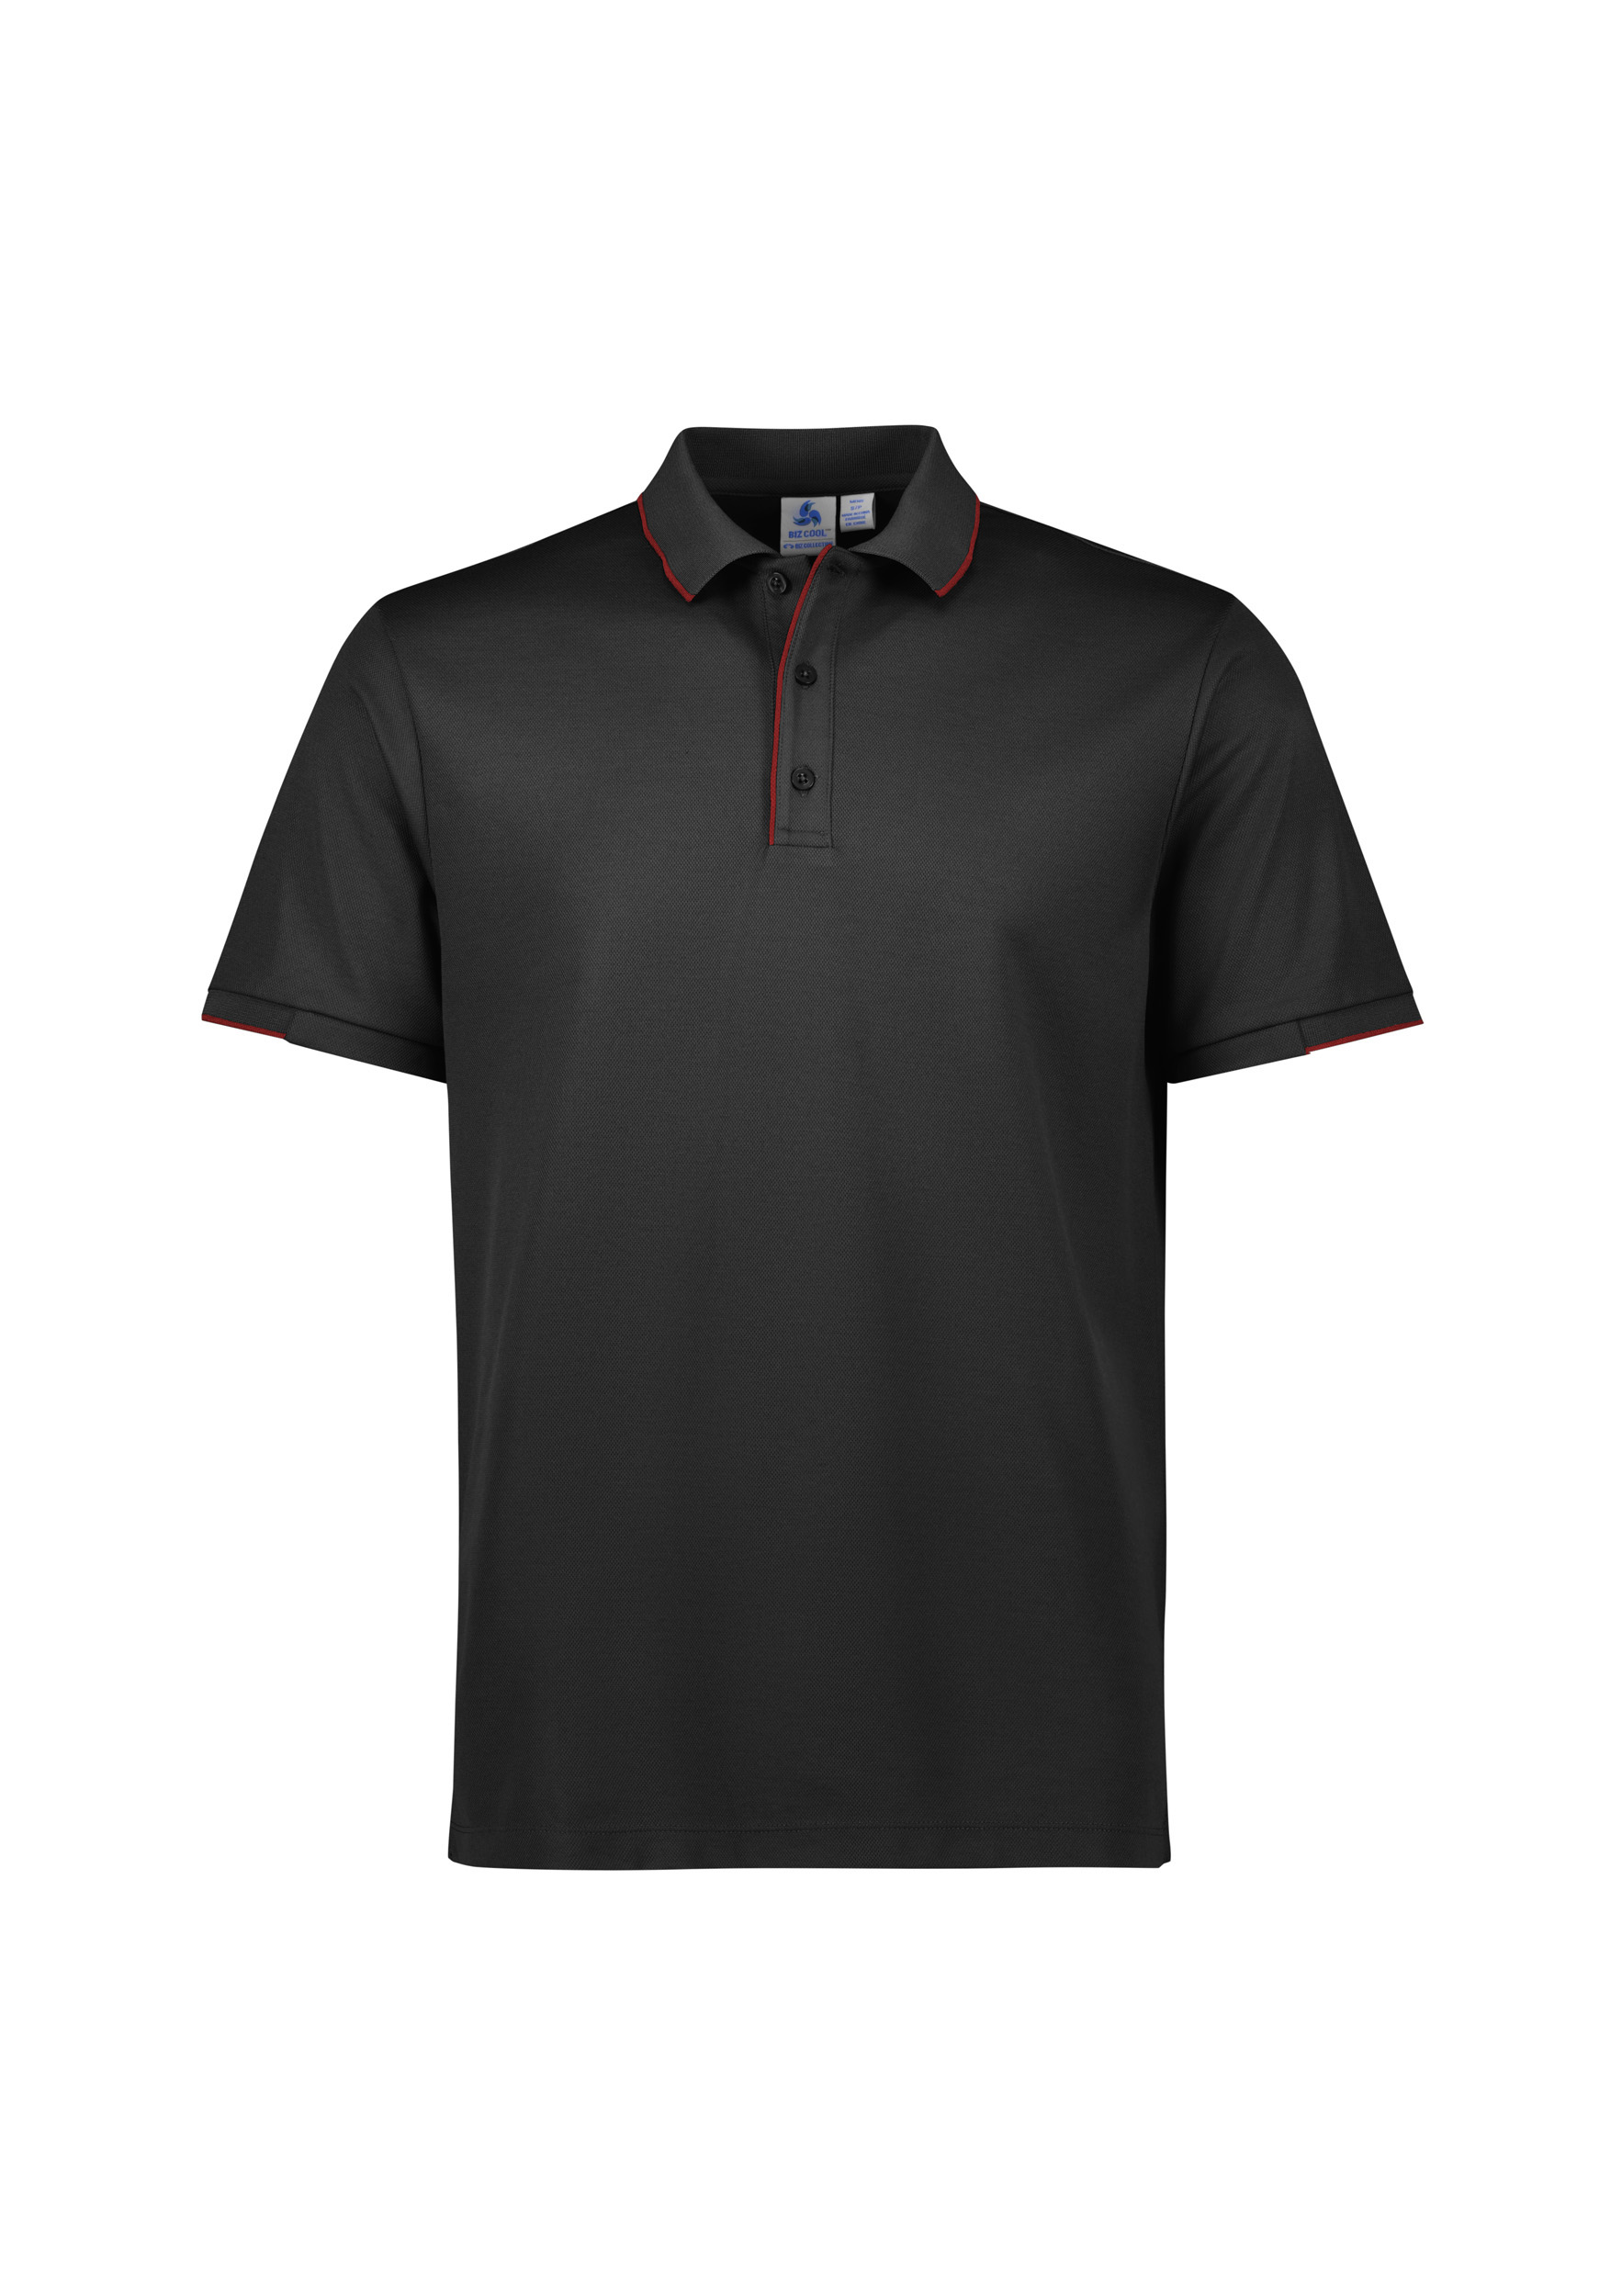 MENS FOCUS POLO BLK/RED 2XL 80% POLY, 20% COTTON-BACK 185GSM